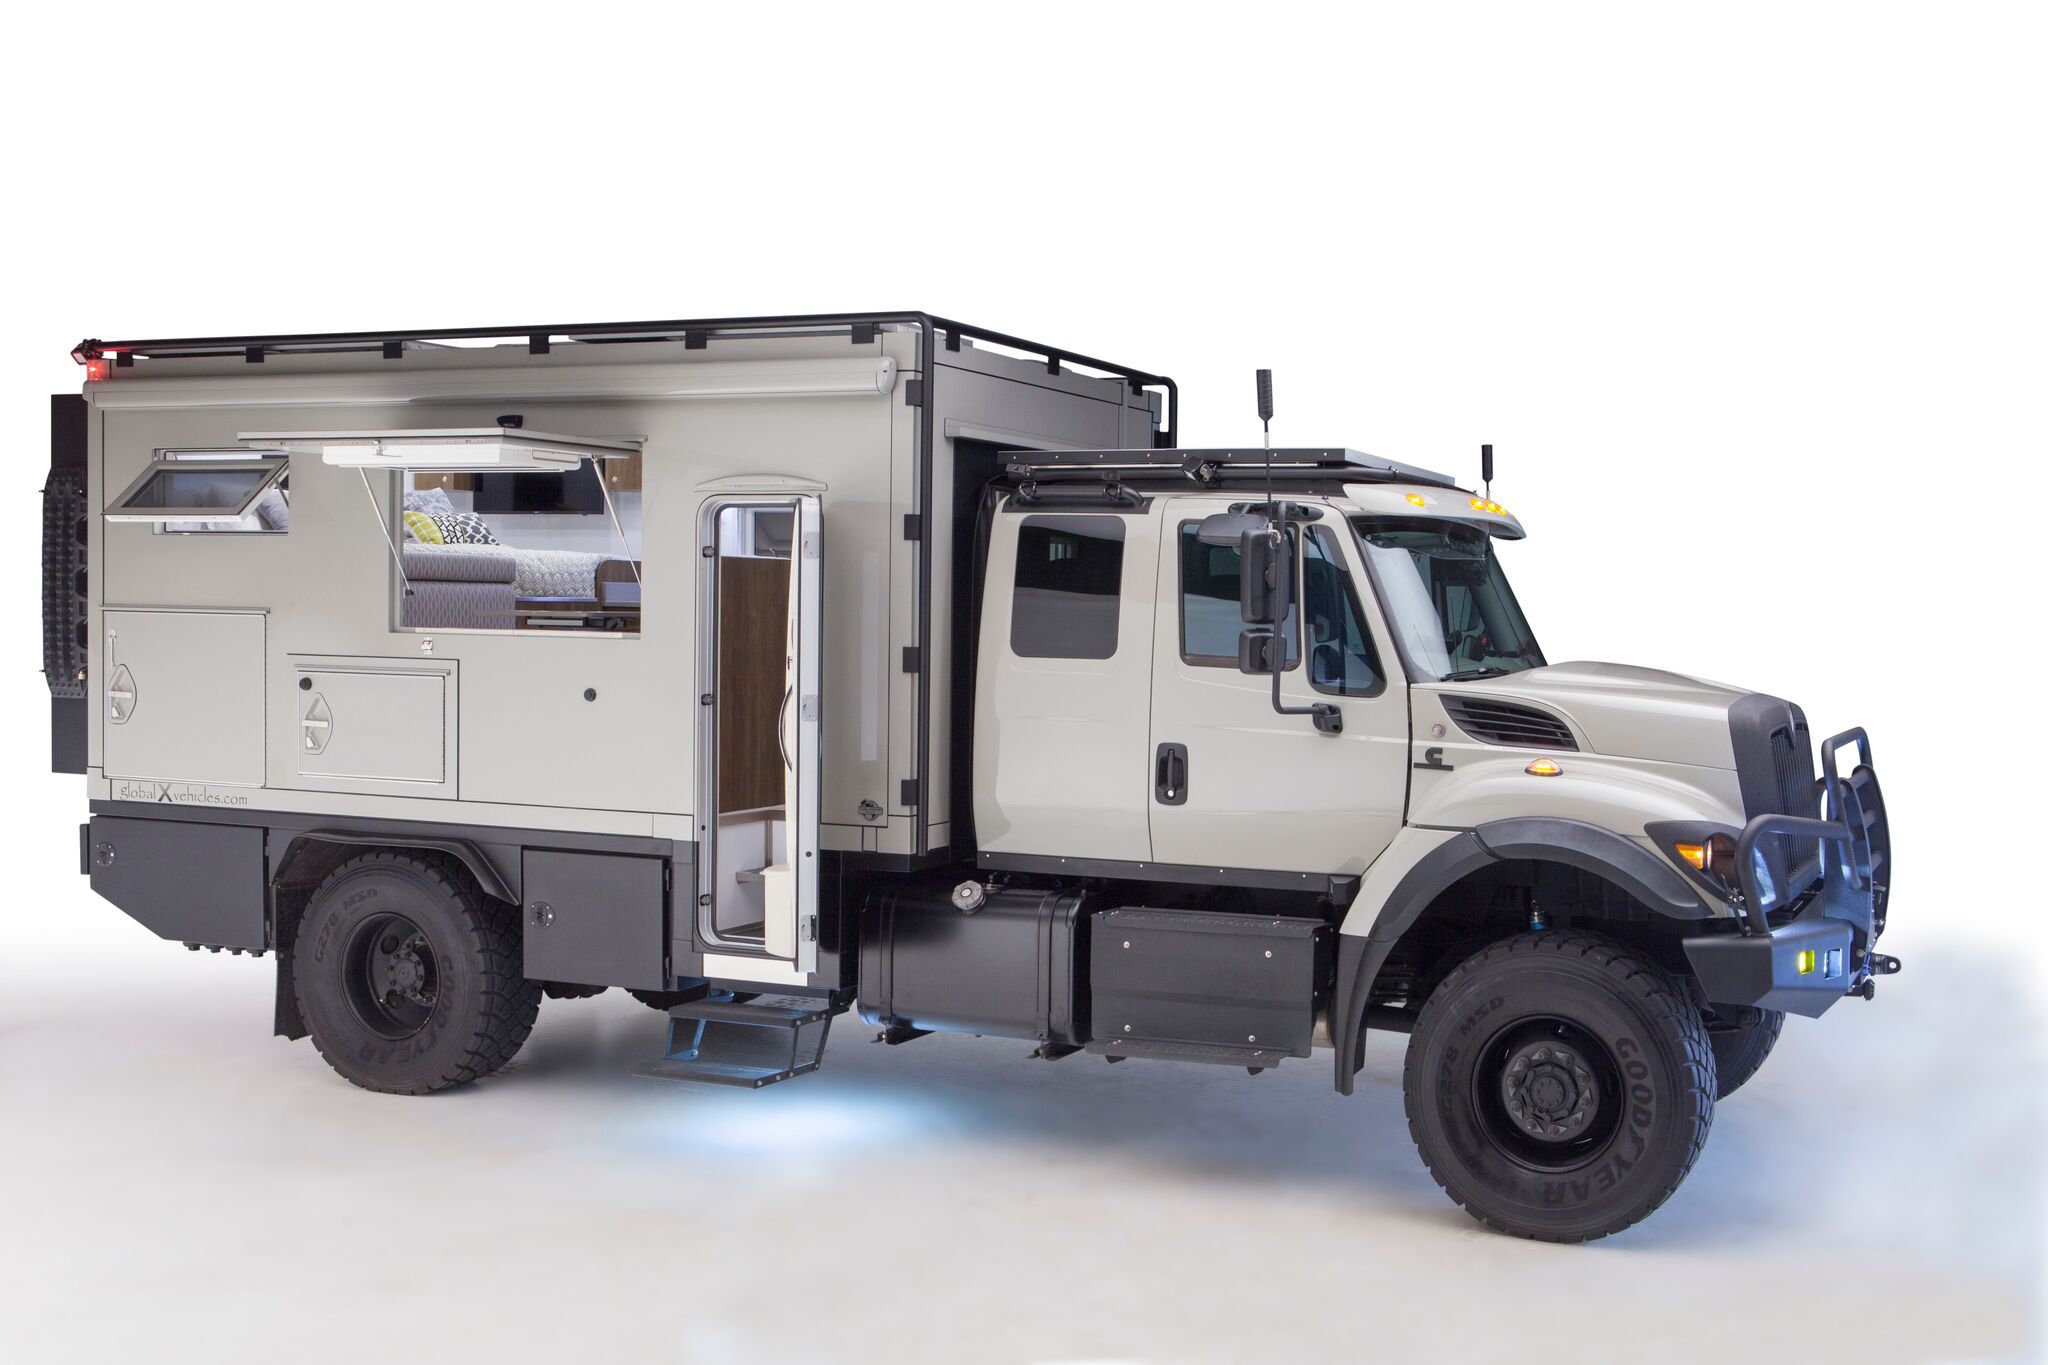 <p>GXV takes full-sized and medium-duty trucks and turns them into RVs that are designed to be expedition-worthy. This demo version, mated to an International 7300 extended-cab chassis, can hold 280 gallons of fuel — enough to go 2,500 miles on a tank, almost the entire length of the country. Not bad for a vehicle that, fully tricked out, weighs about 24,000 pounds. The cost? About <a href="https://www.globalxvehicles.com/safari-extreme.html">$650,000</a> at base. </p><p><b>Related:</b> <a href="https://blog.cheapism.com/rv-fuel-saving-tips/">Ways to Save Money on Gas for Your RV</a> </p>